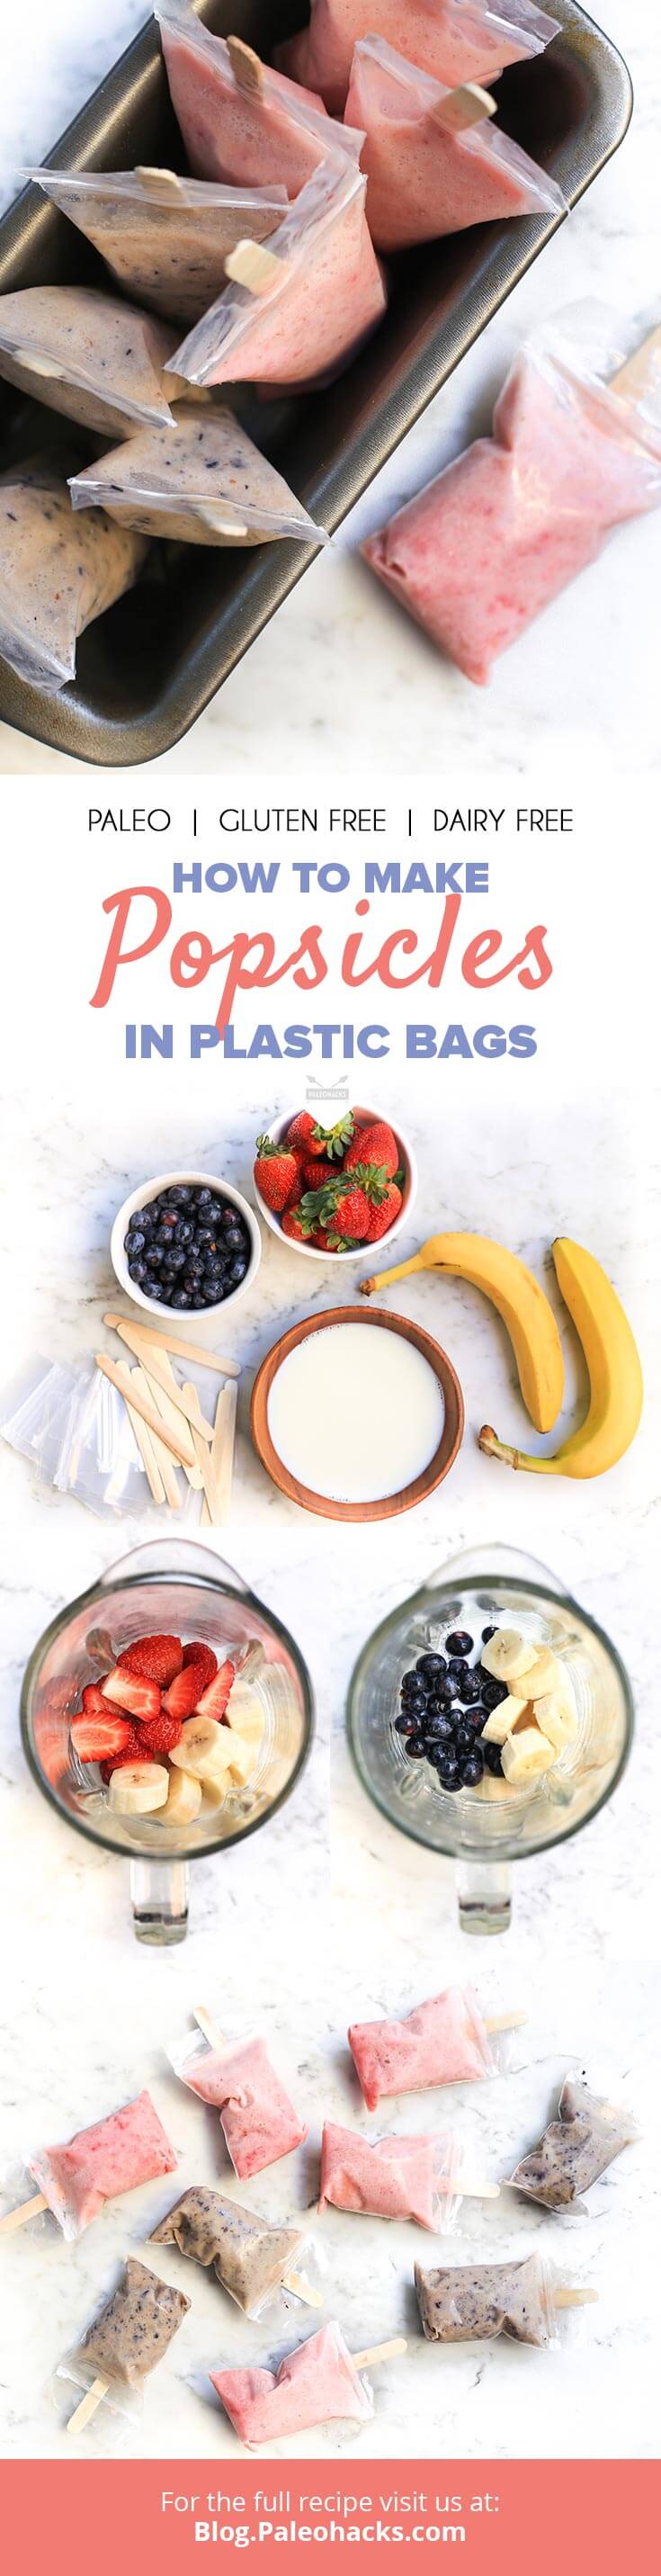 If you love popsicles but don’t happen to own a popsicle mold, don’t worry. With these practical popsicles in plastic bags, you can easily make your own!